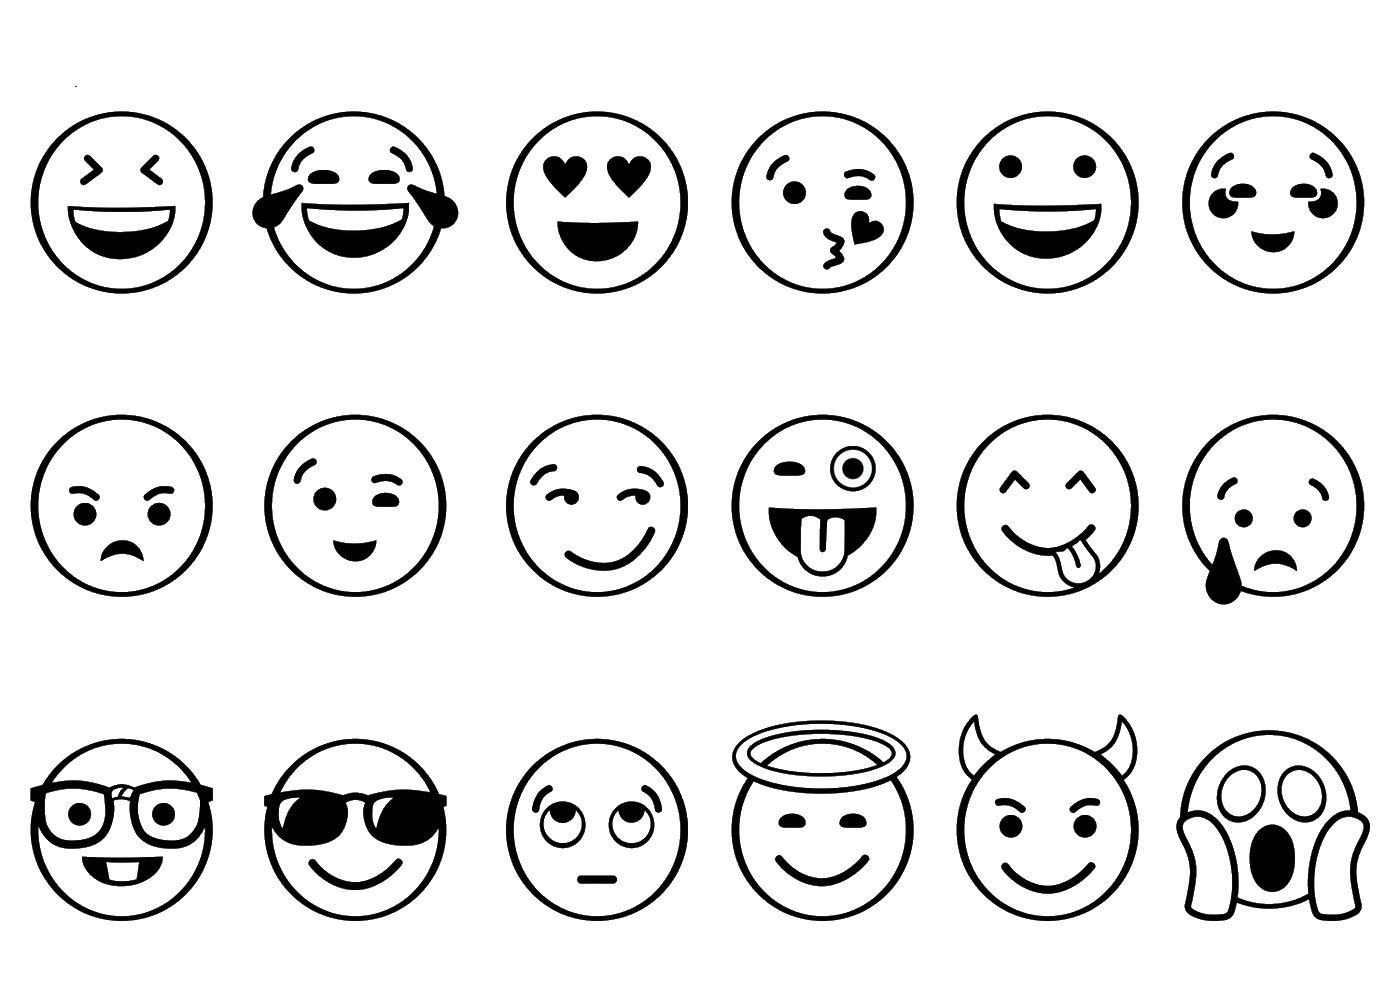 Emoji coloring pages pdf ideas to express your feeling